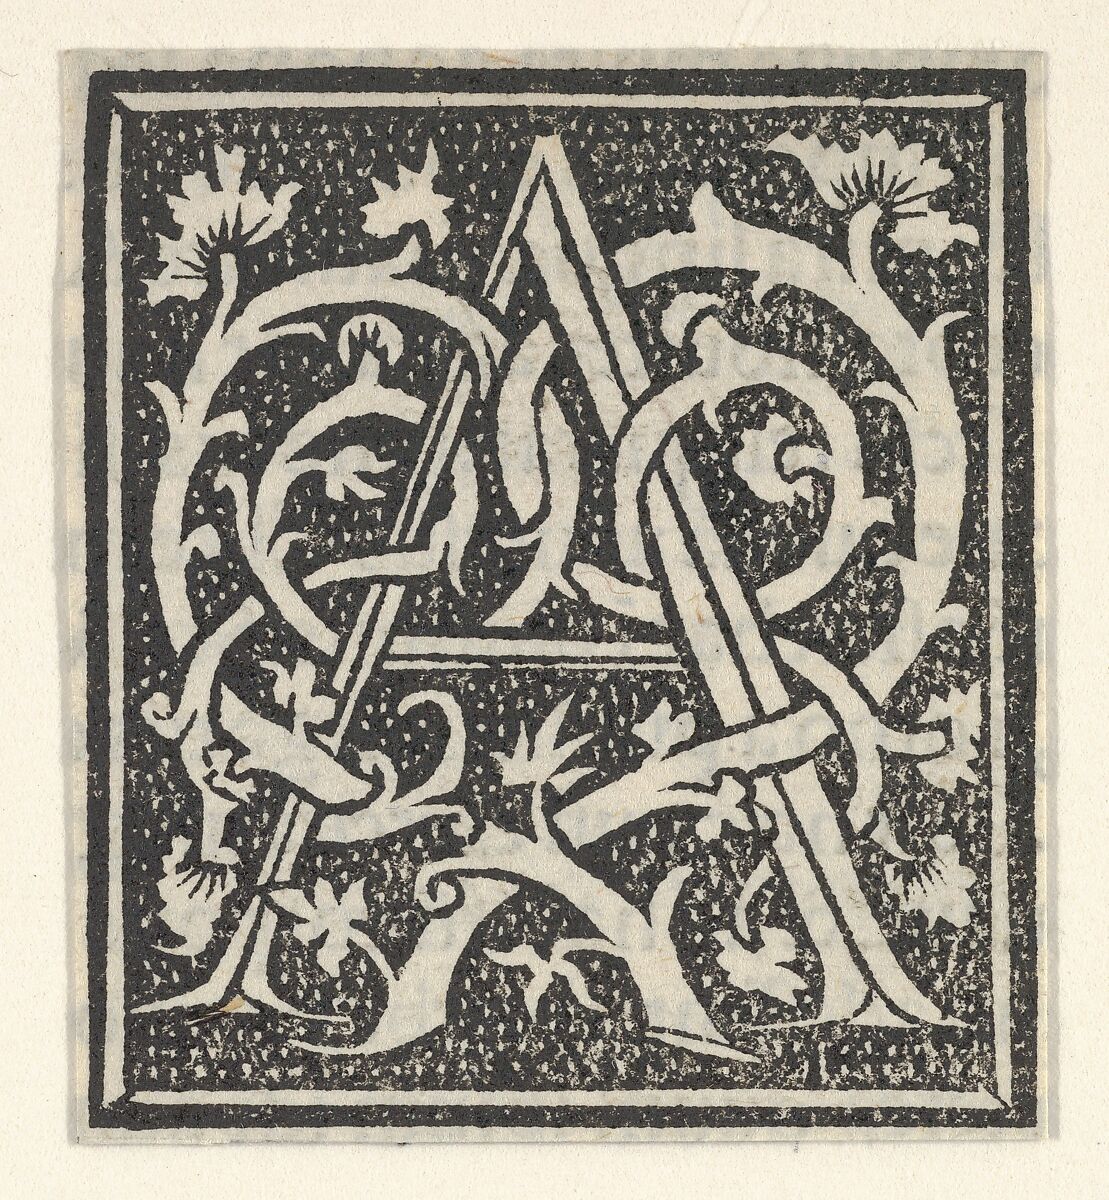 Initial letter A on patterned background, Anonymous, Italian, 16th century, Woodcut, criblé ground 